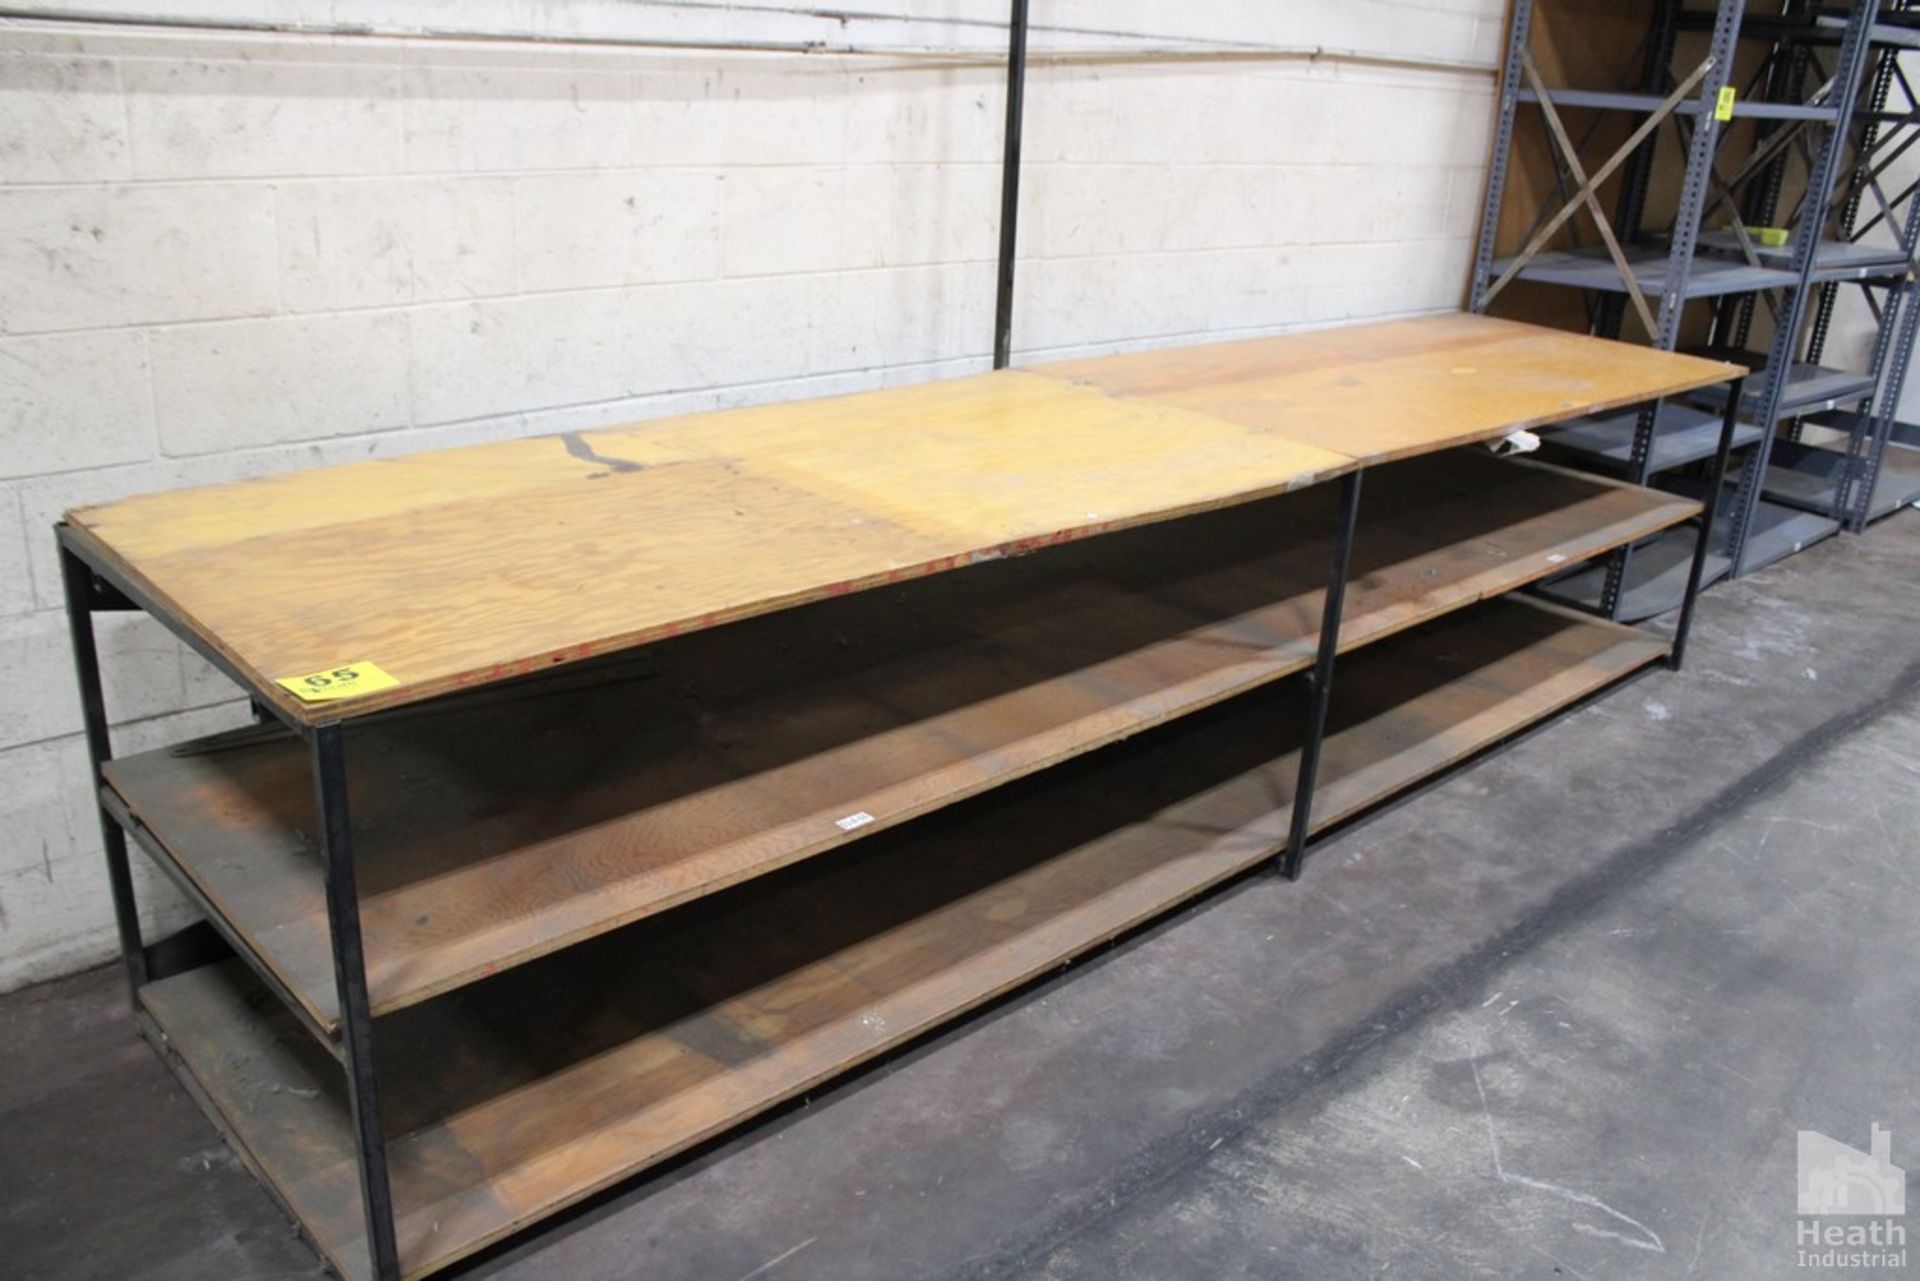 STEEL SHOP TABLE WITH WOOD TOP AND AERO-MOTIVE MODEL RB4 BALANCER, 12' X 33" X 33"